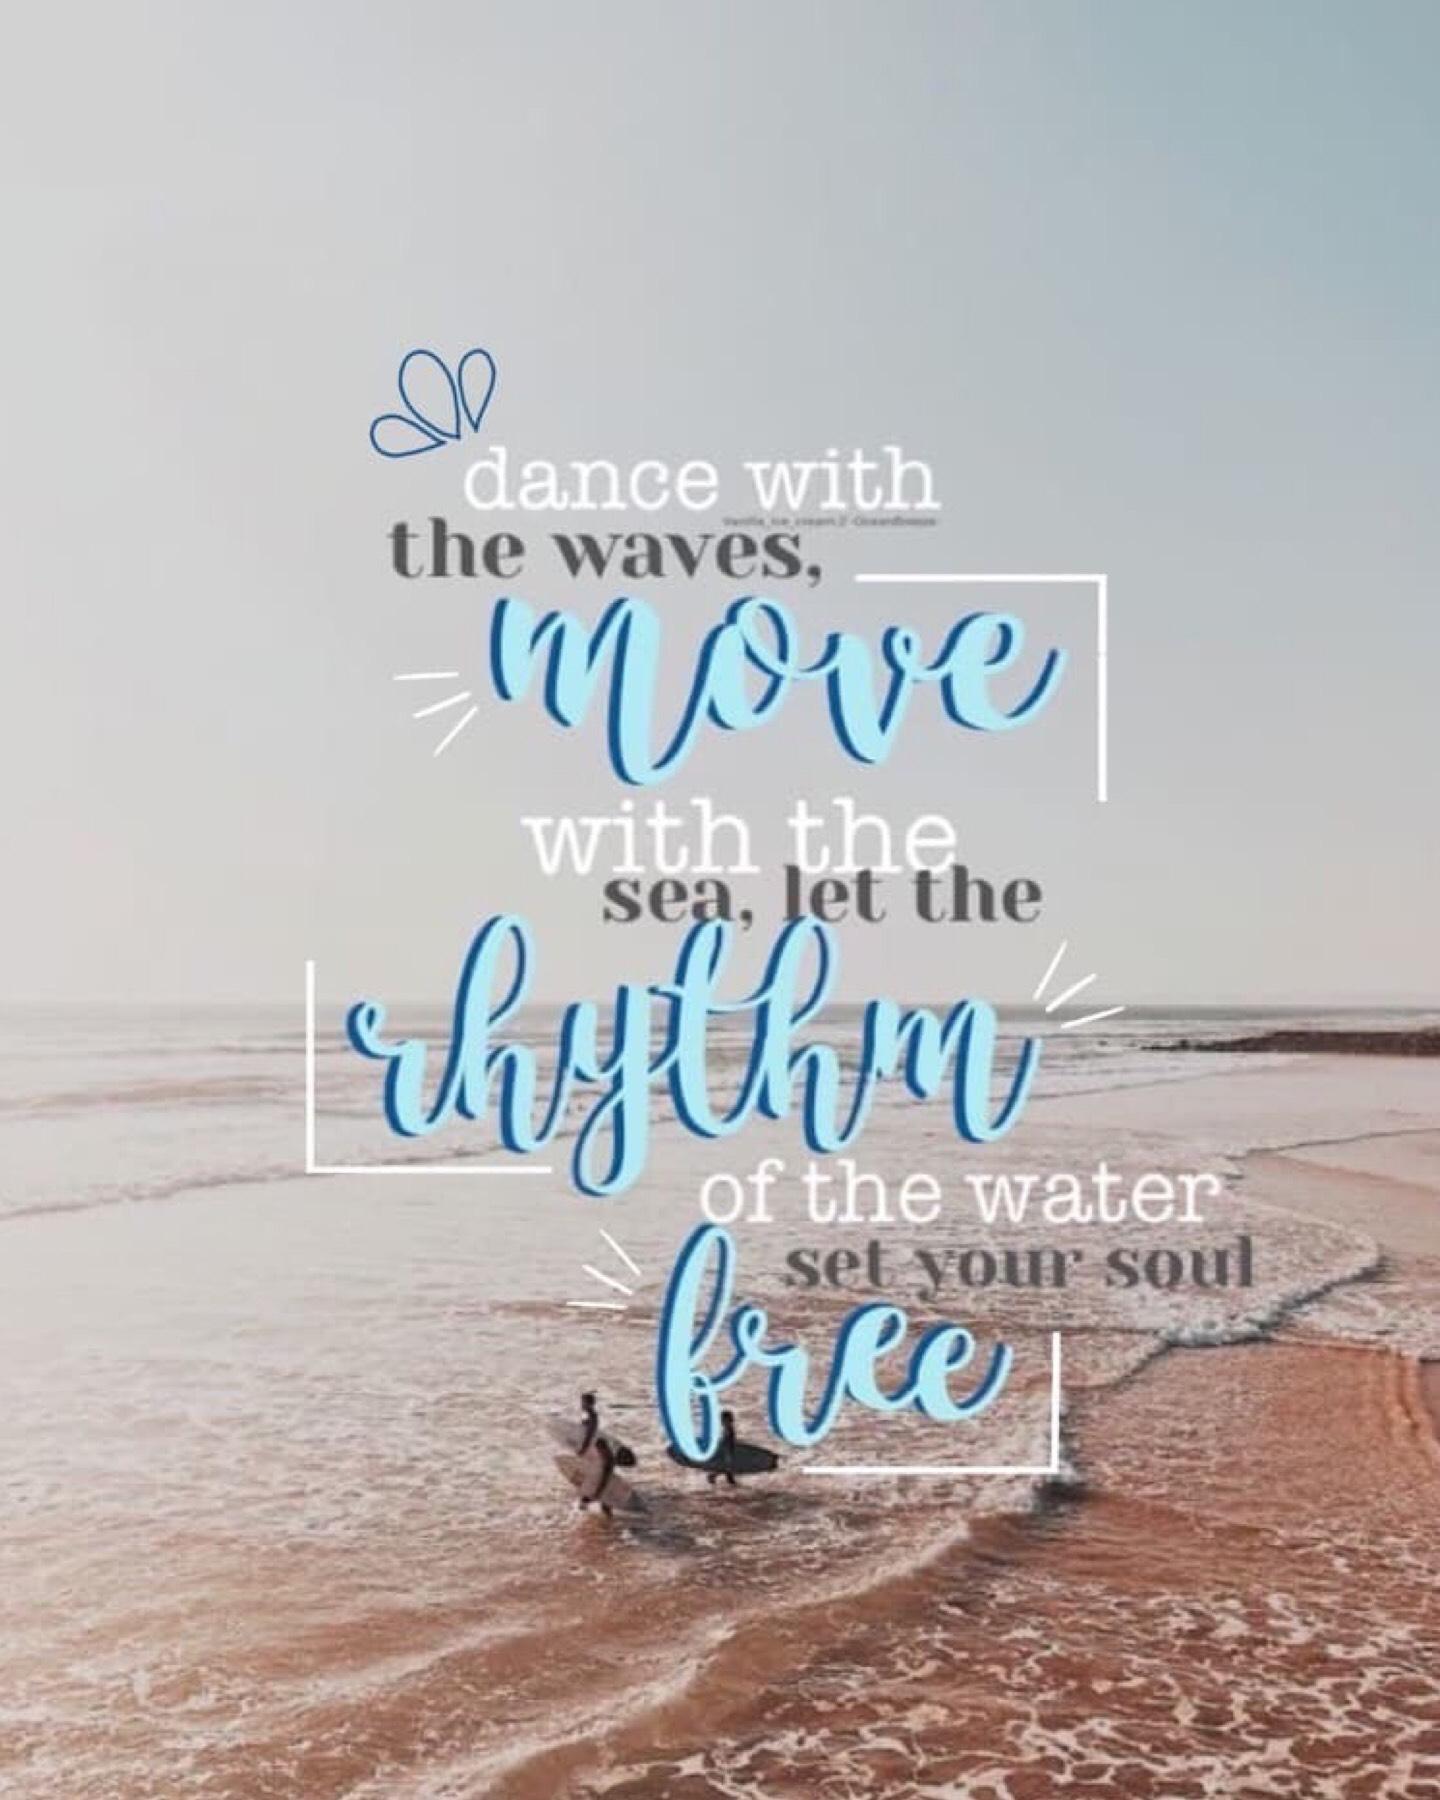 “dance with the waves, move with the sea, let the rhythm of the water set your soul free.” ｔａｐ
Collab with Vanilla_Ice_Cream